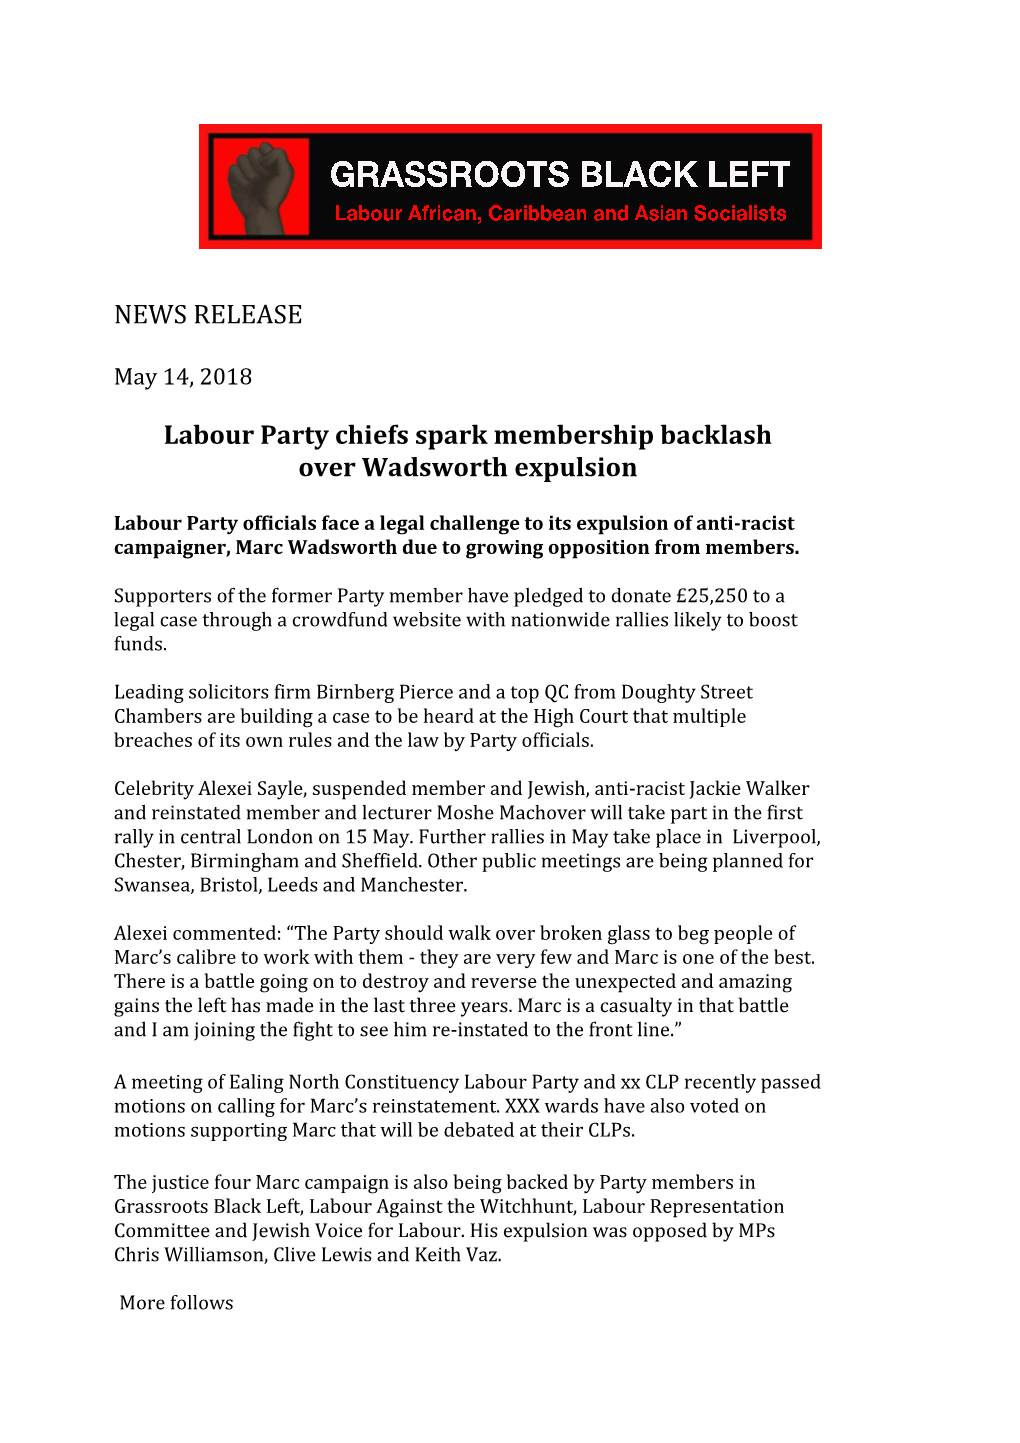 NEWS RELEASE Labour Party Chiefs Spark Membership Backlash Over